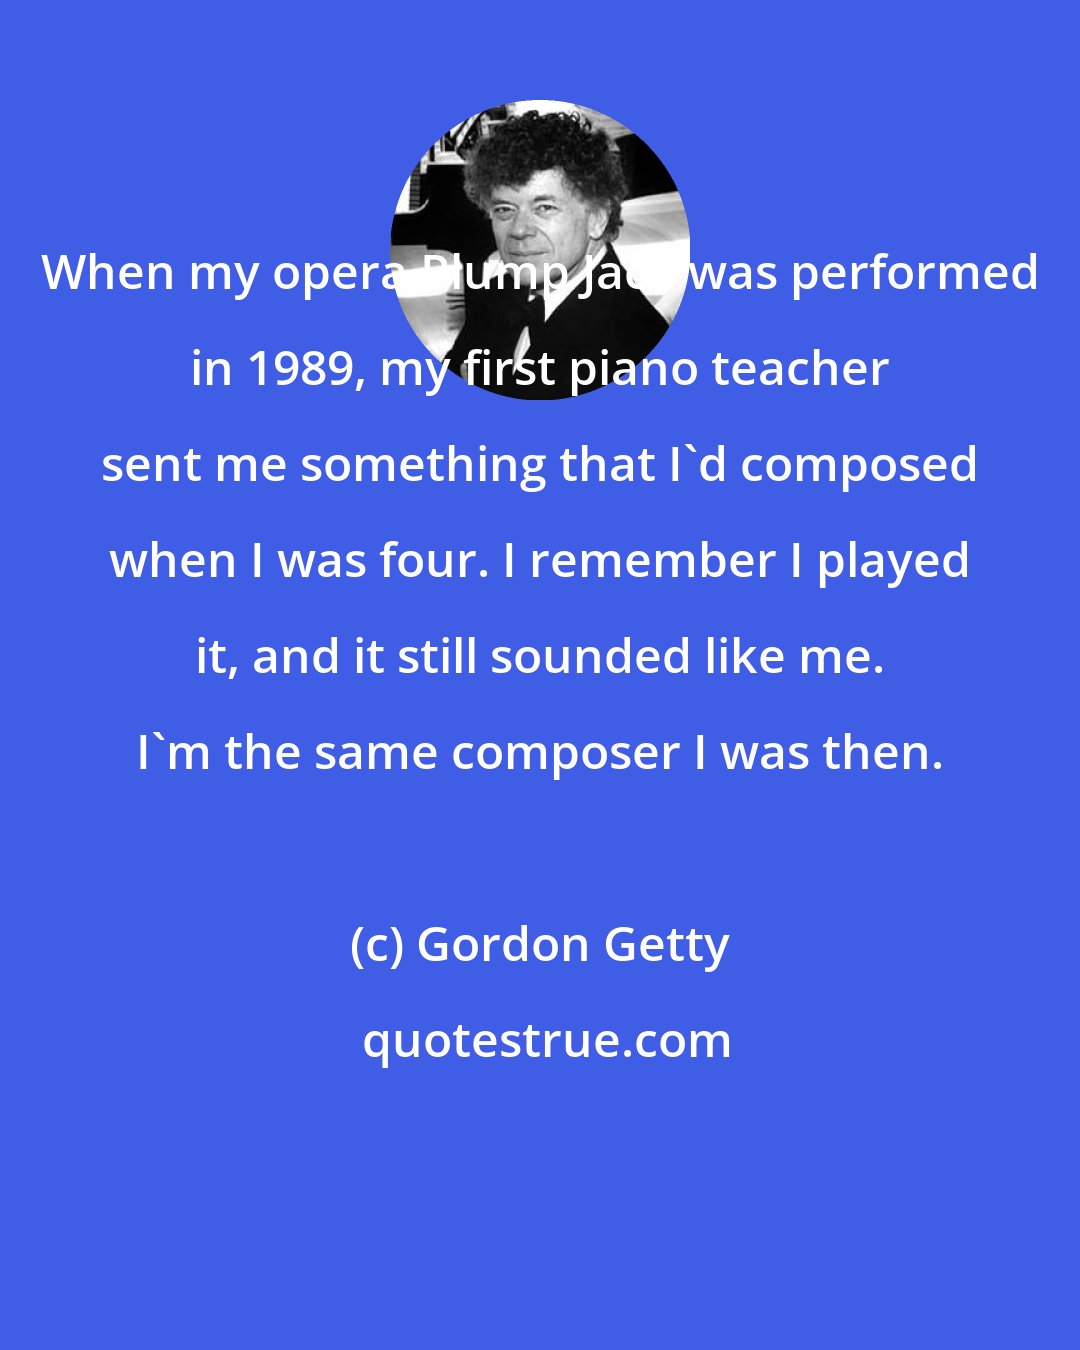 Gordon Getty: When my opera Plump Jack was performed in 1989, my first piano teacher sent me something that I'd composed when I was four. I remember I played it, and it still sounded like me. I'm the same composer I was then.